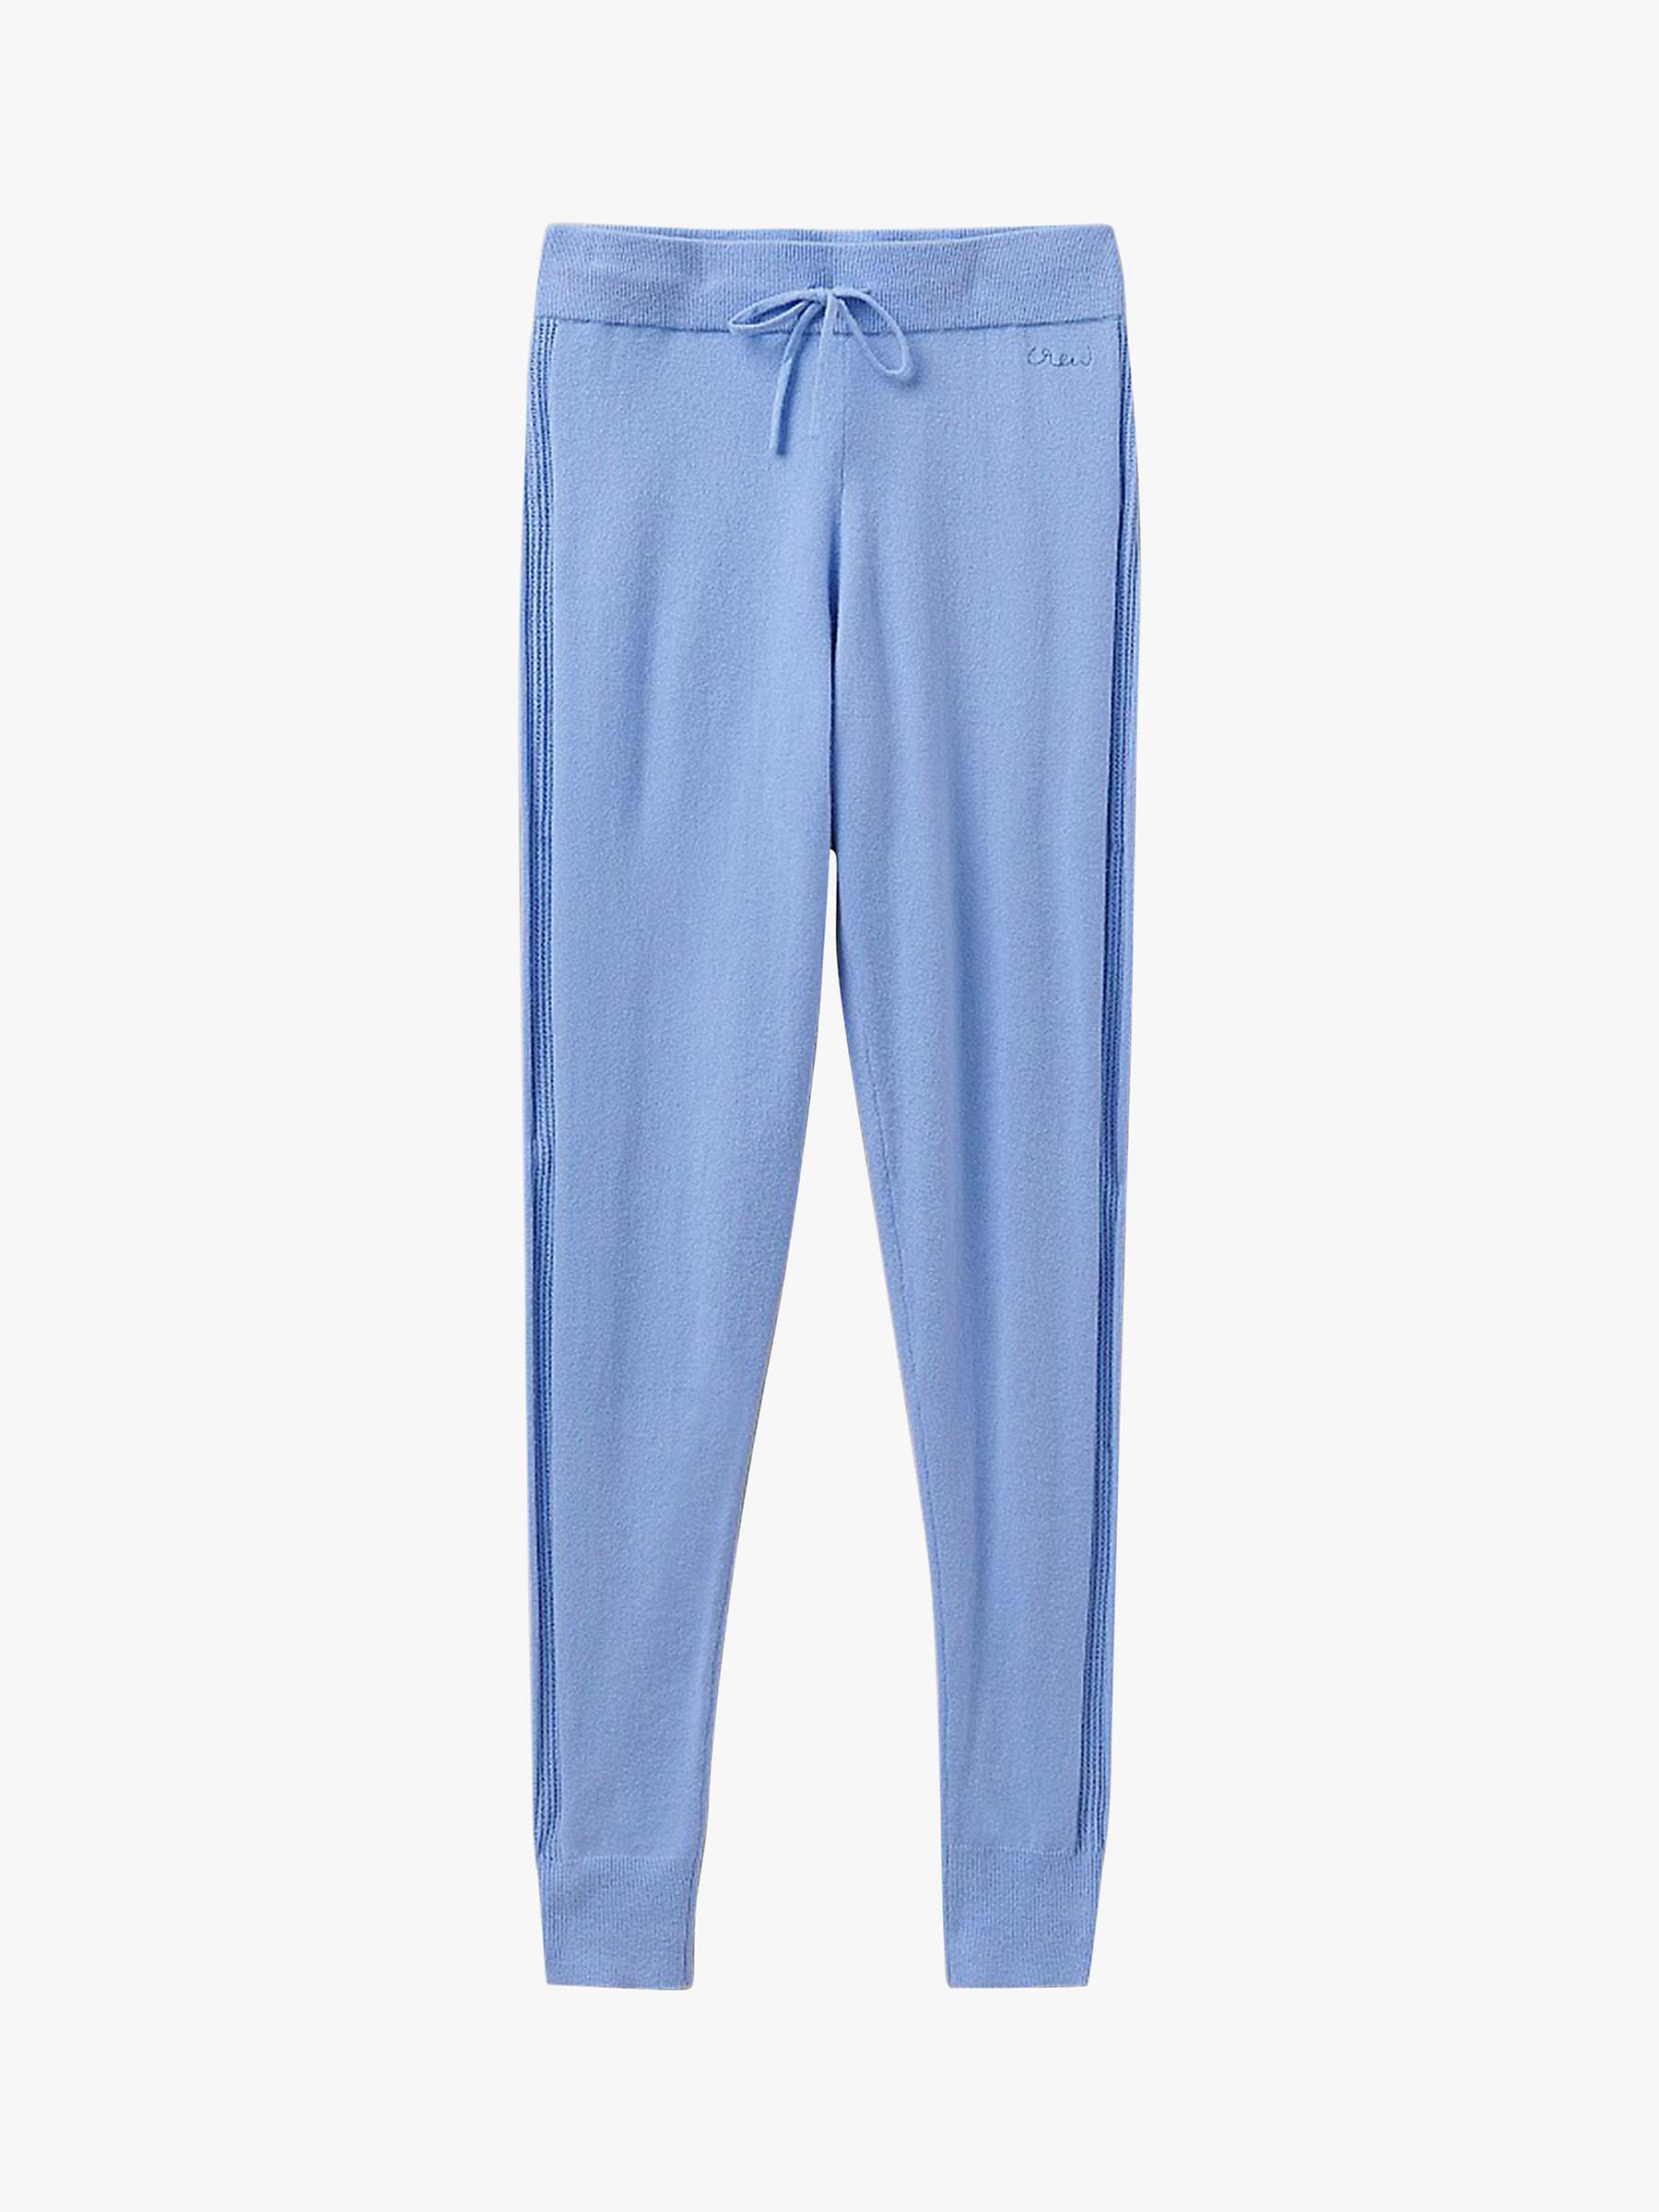 Buy Crew Clothing Knitted Pyjama Bottoms, Light Blue Online at johnlewis.com